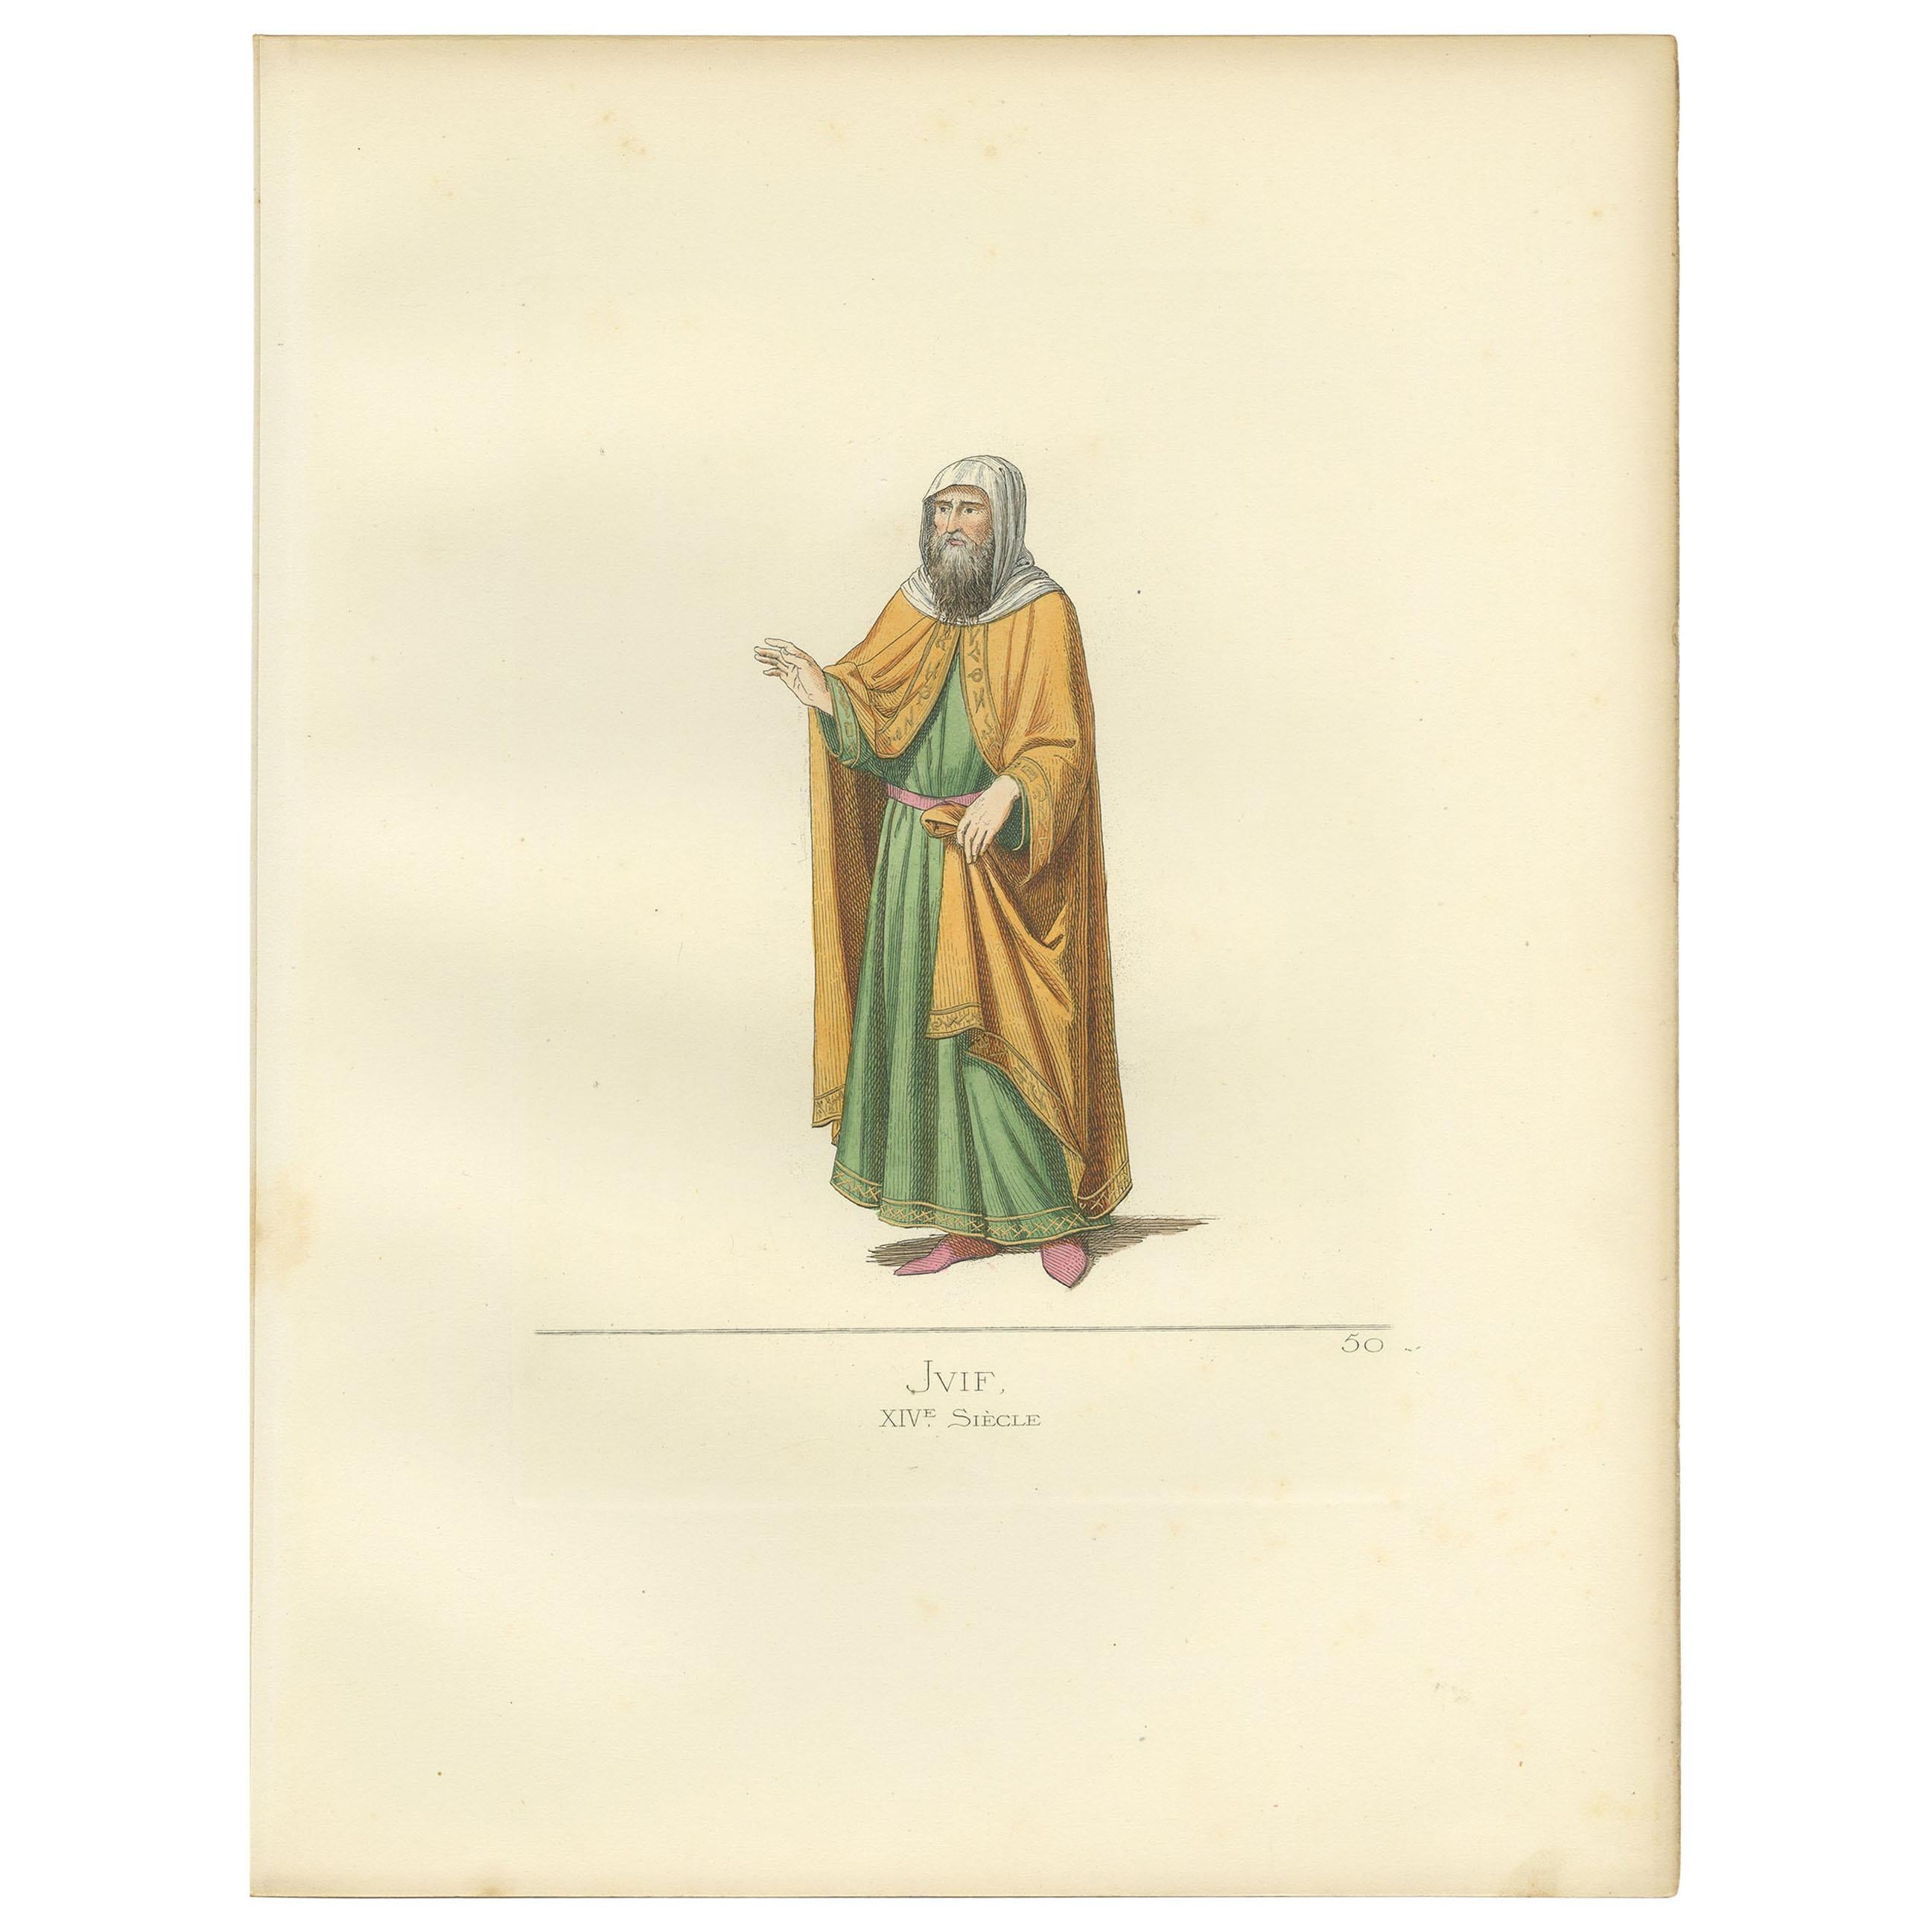 Antique Print of a Jewish Man in Italy by Bonnard, '1860'